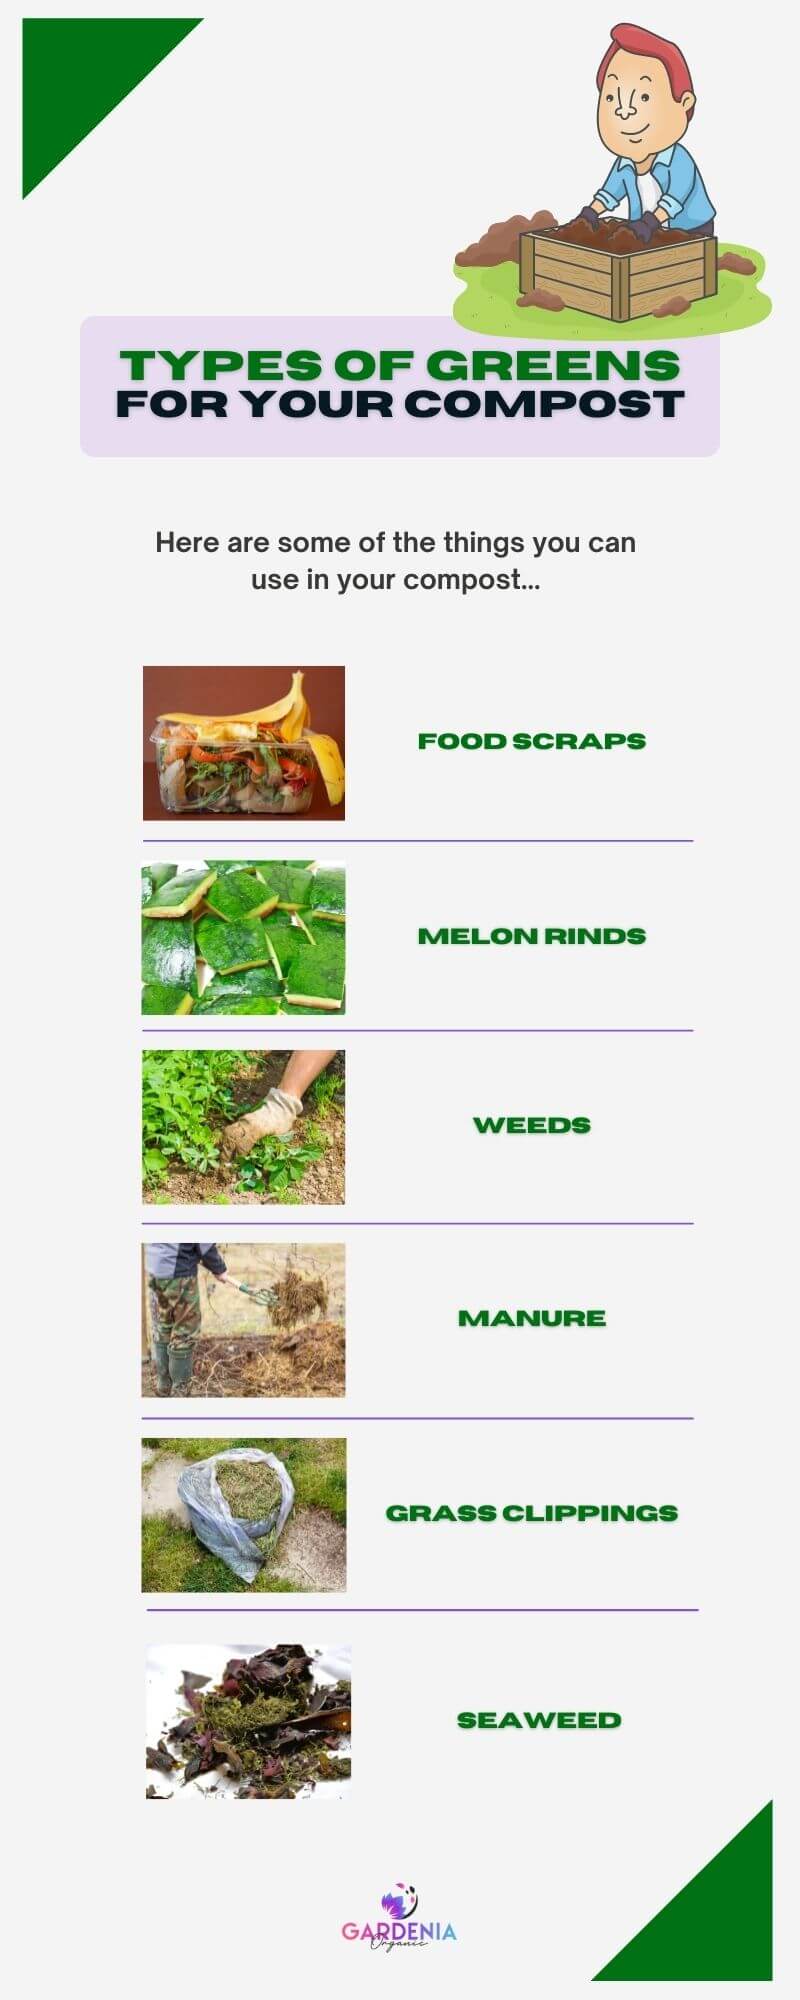 Types of greens in compost